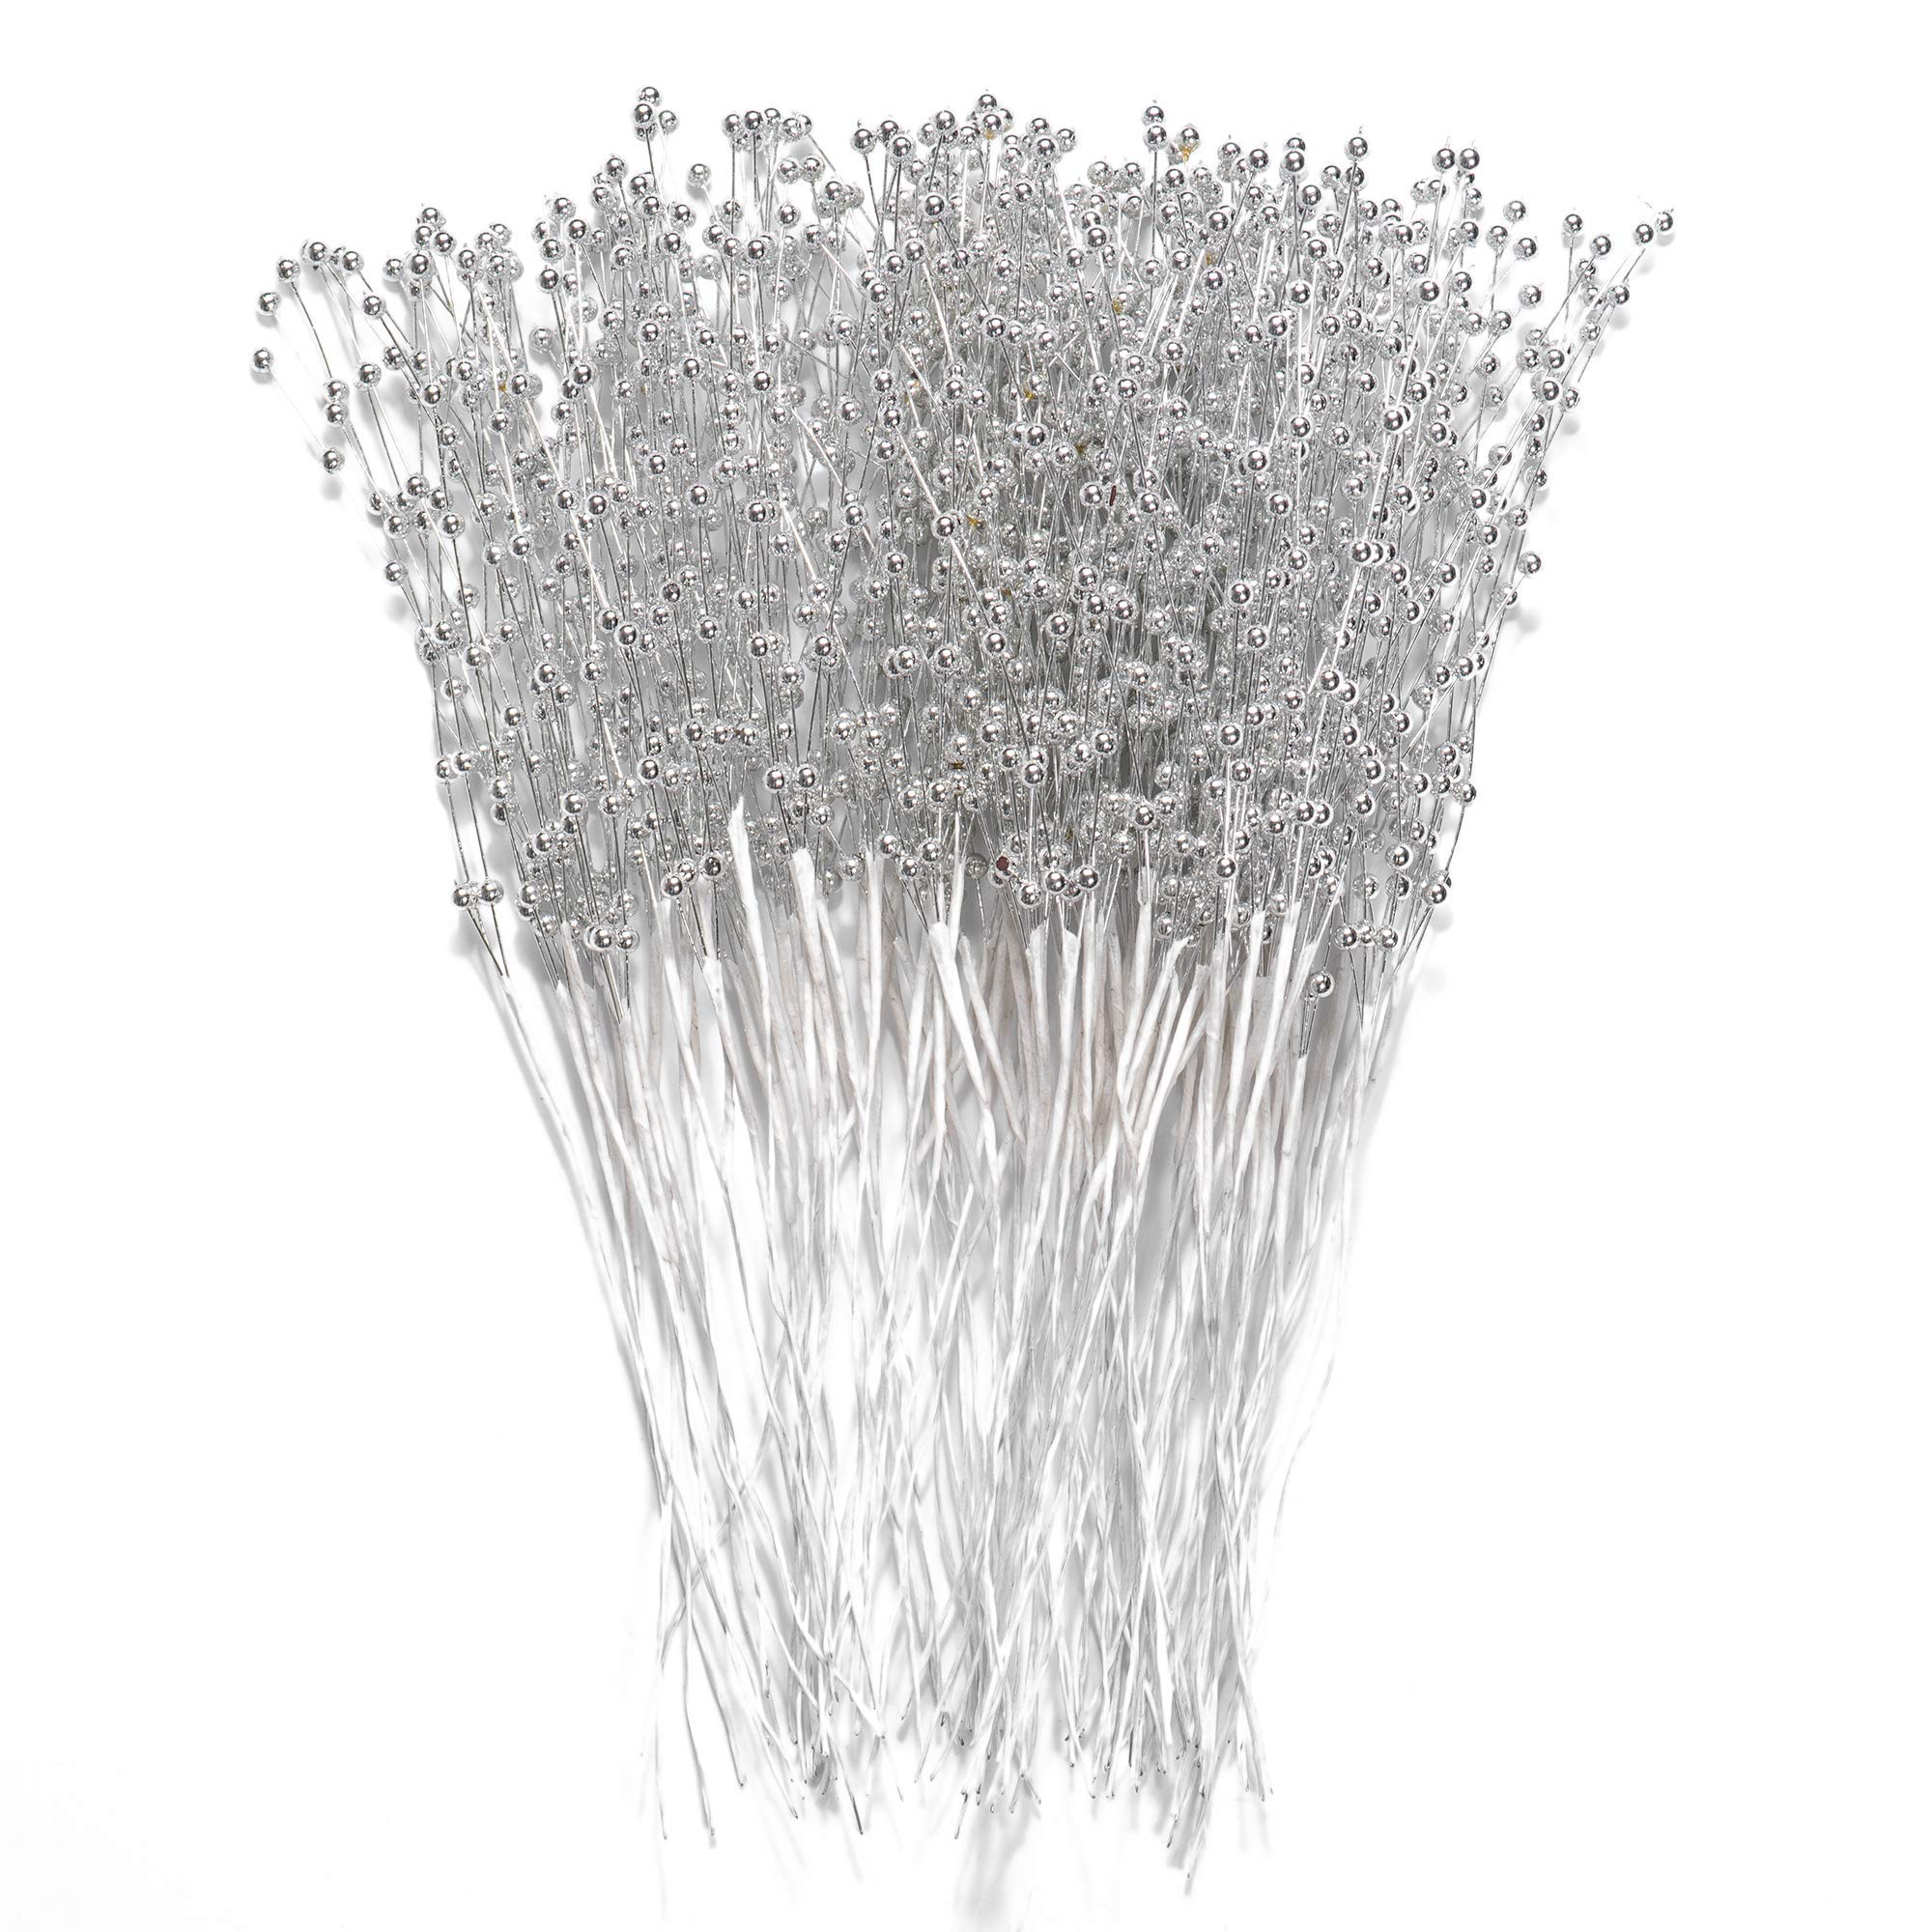 100 Pieces String Pearl Sticks Pearls for Crafts, Artificial